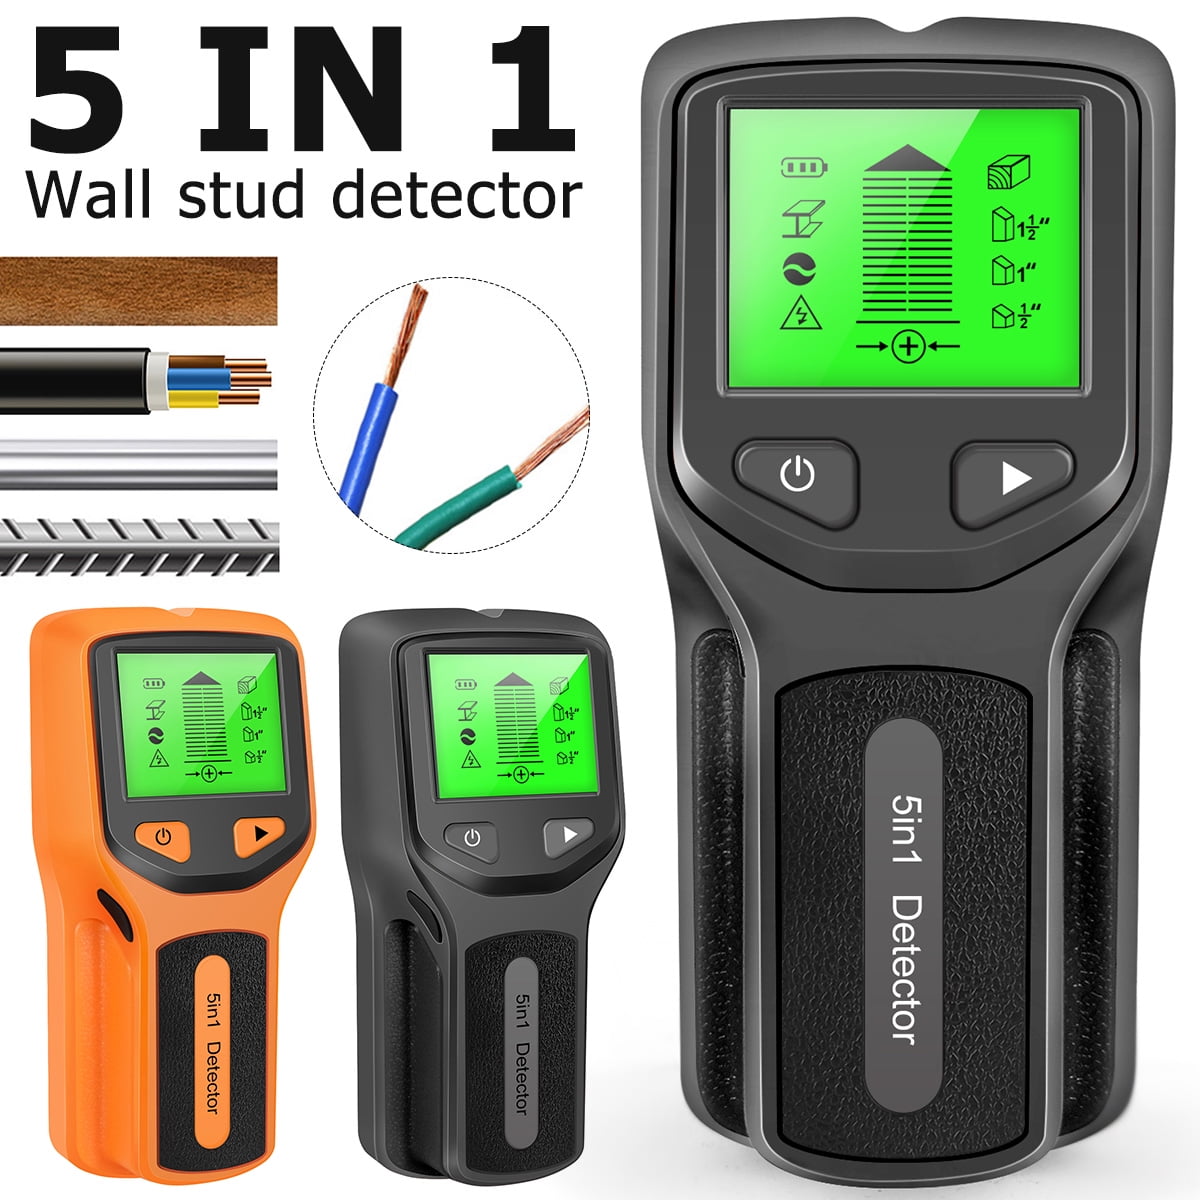 SH402 5 In 1 Wall Stud Finder With LCD Display For Wood Current, AC Live  Wire Up Detection And Edge Center Detection From Ping04, $8.15